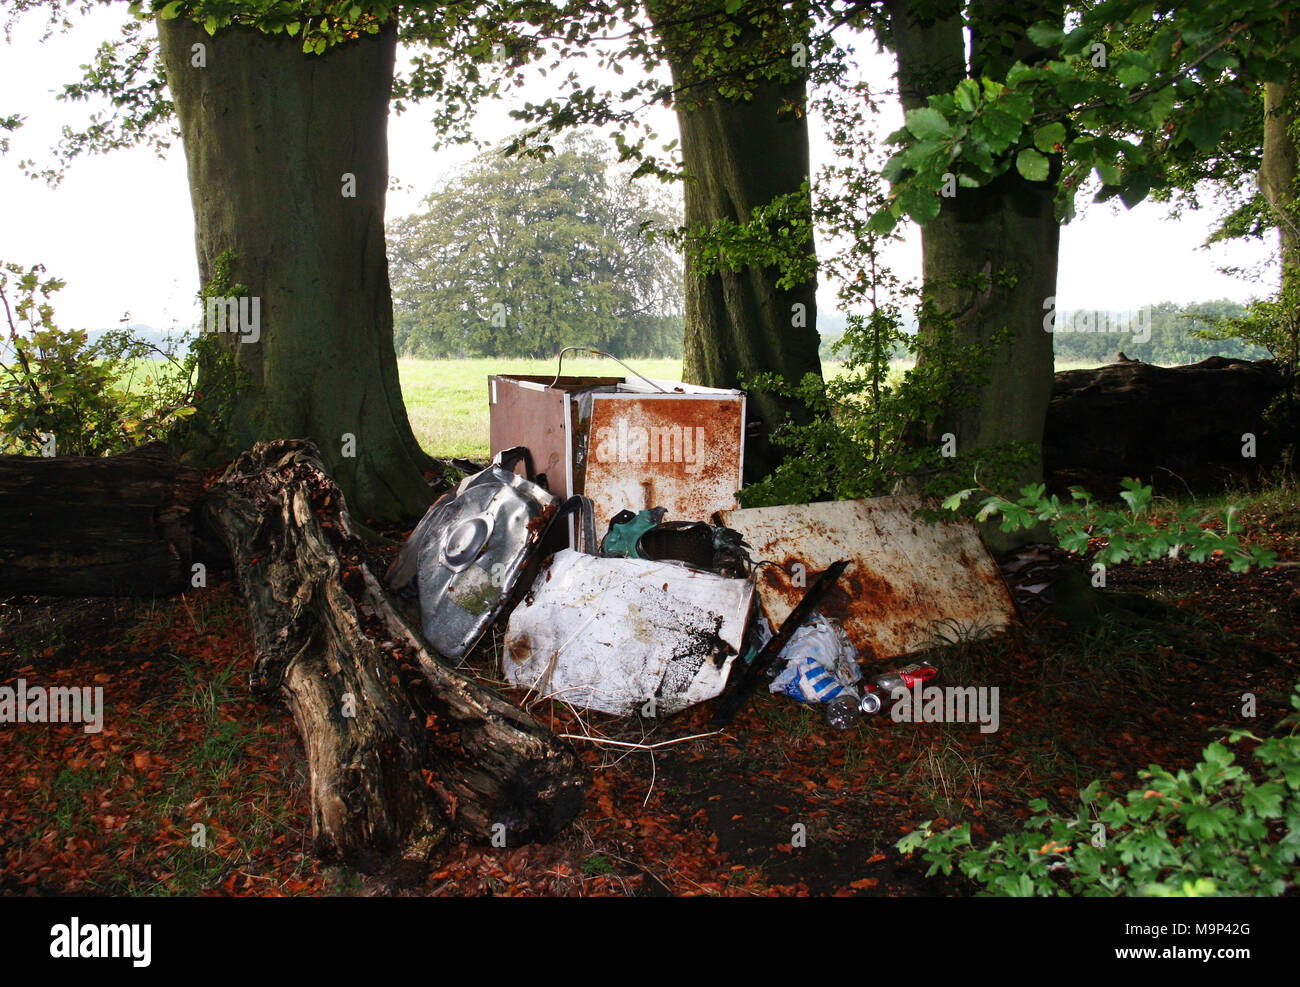 Rubbish dumped in woods. Illegal countryside fly-tipping and rural vandalism spoiling the rural environment in Kent, UK. Stock Photo